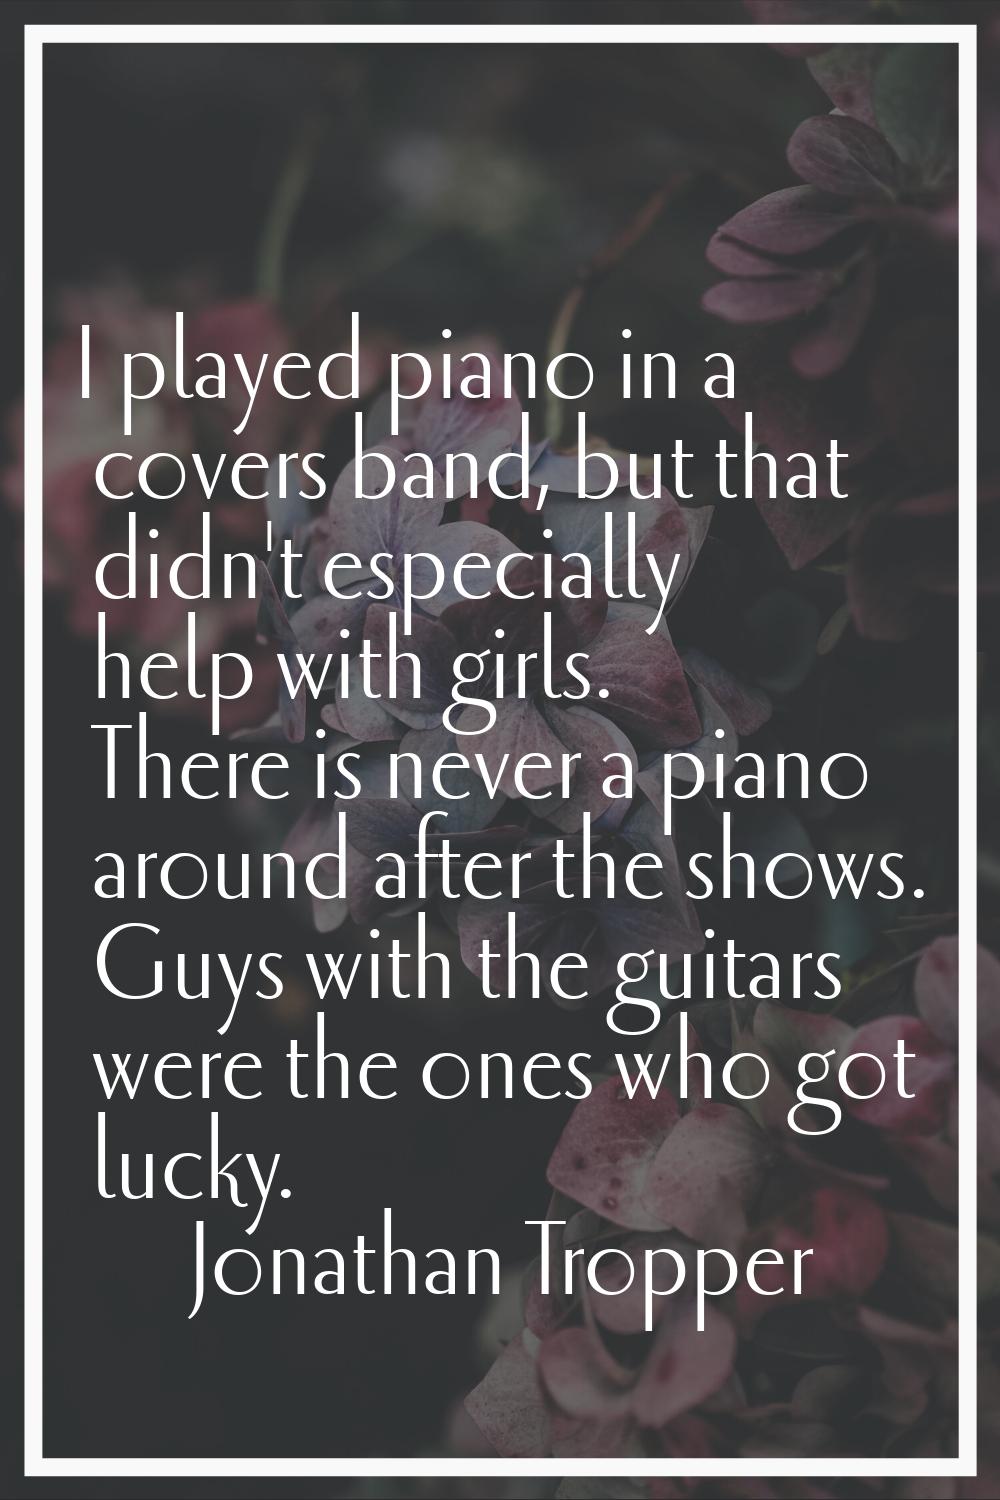 I played piano in a covers band, but that didn't especially help with girls. There is never a piano